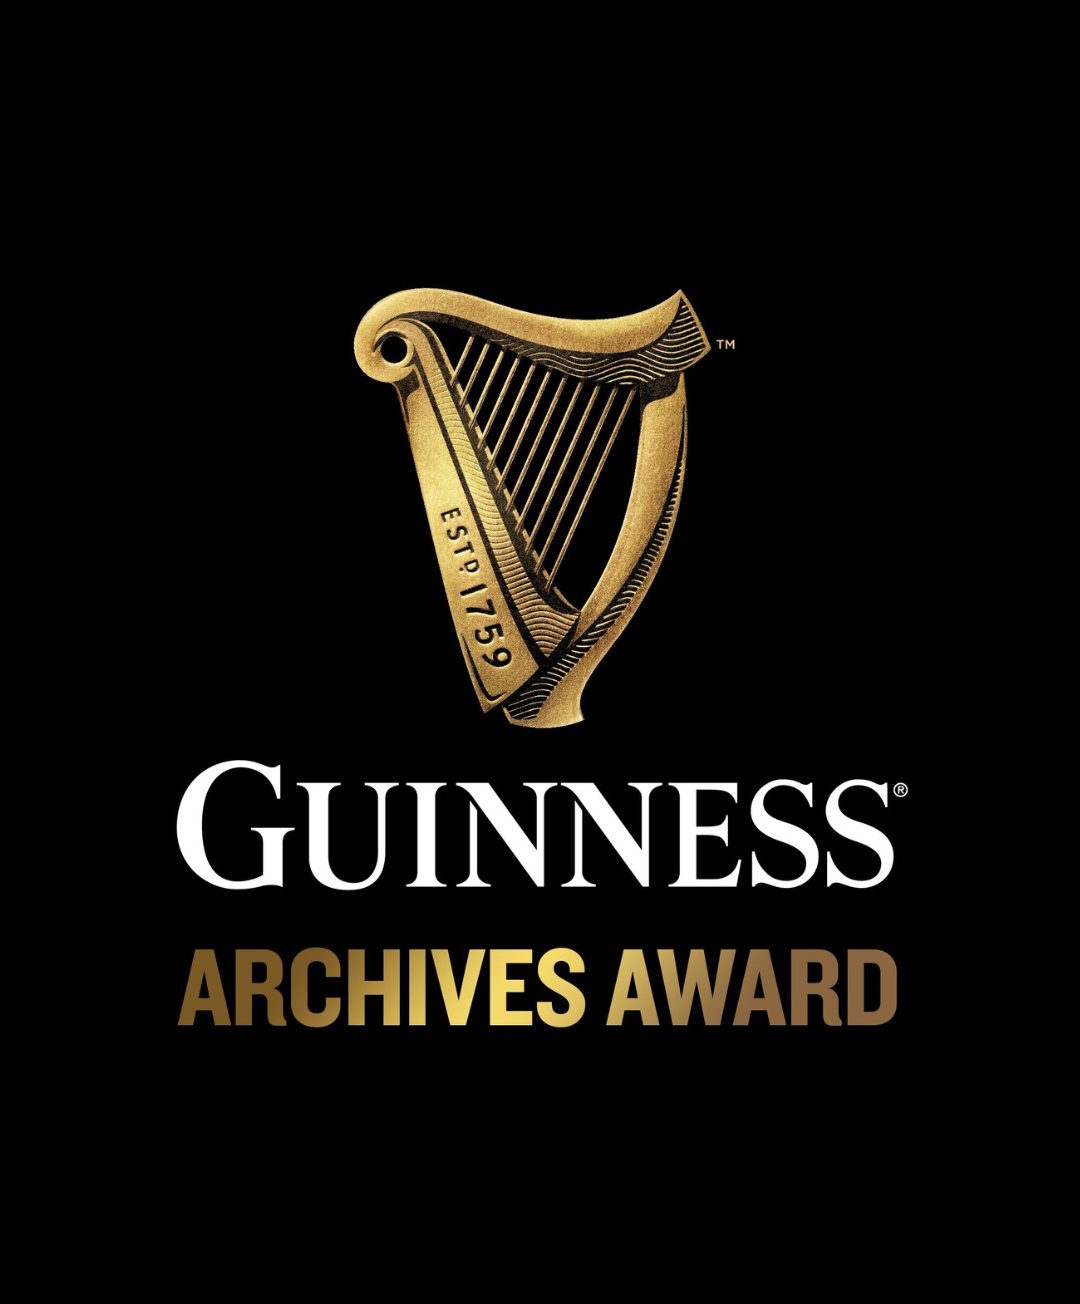 A Guinness logo on a black background with 'archives awards' written on it